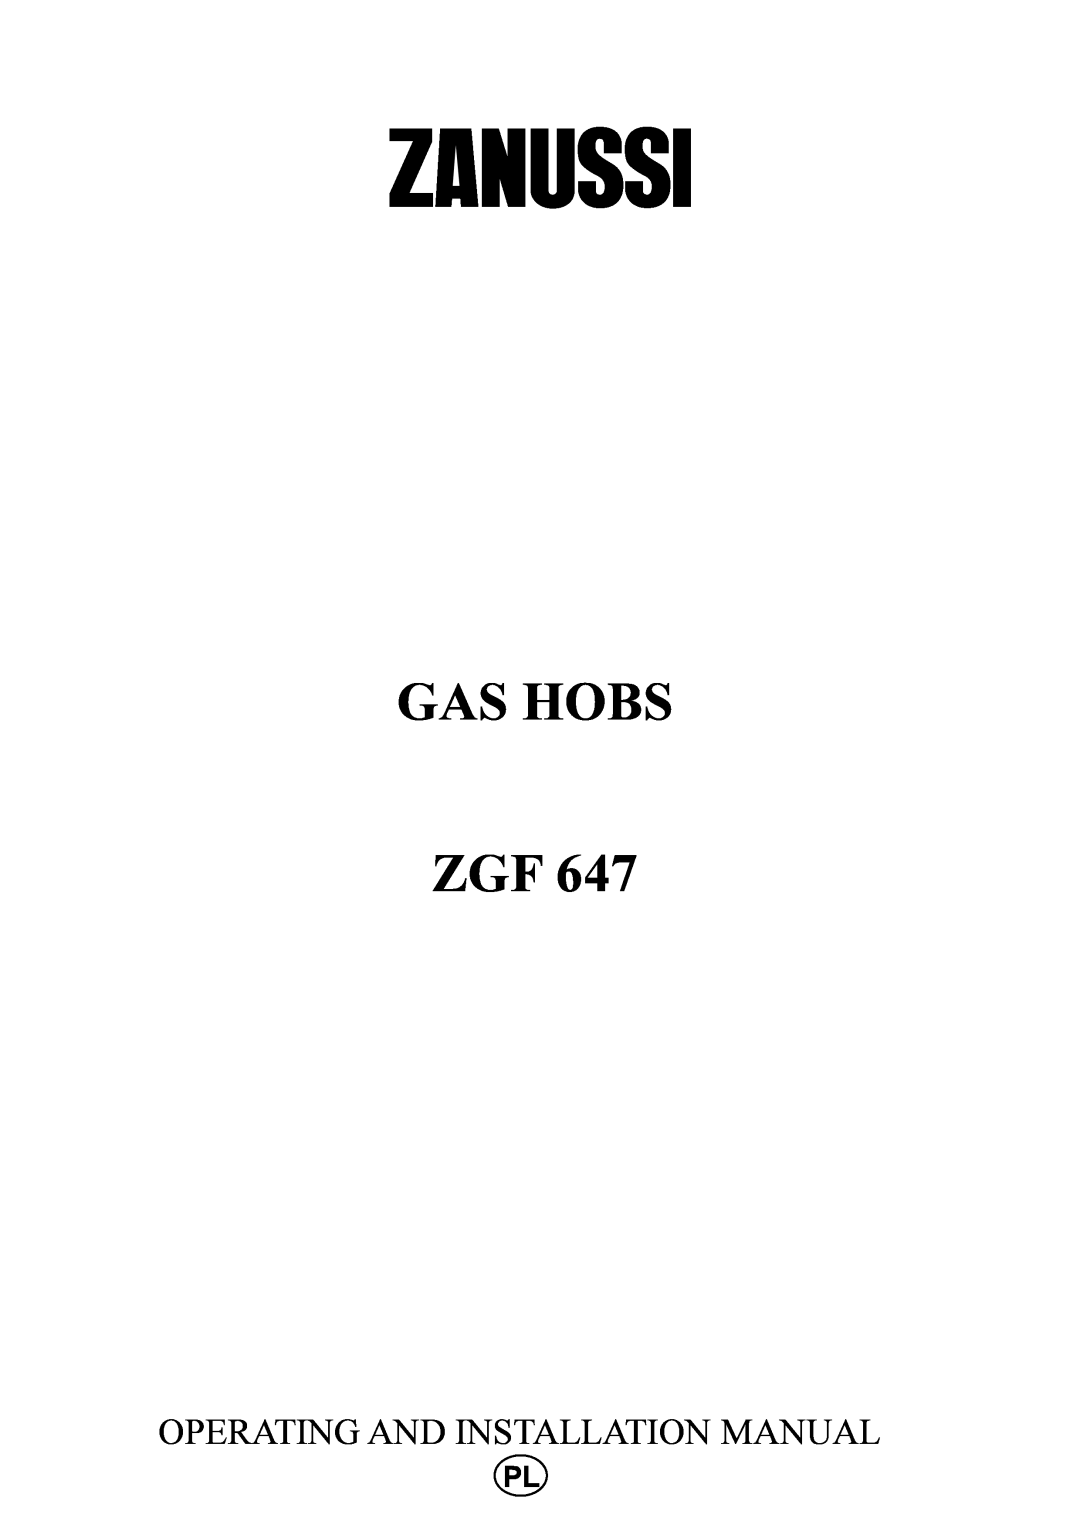 Zanussi ZGF 647 installation manual Gas Hobs Zgf, Operating And Installation Manual 